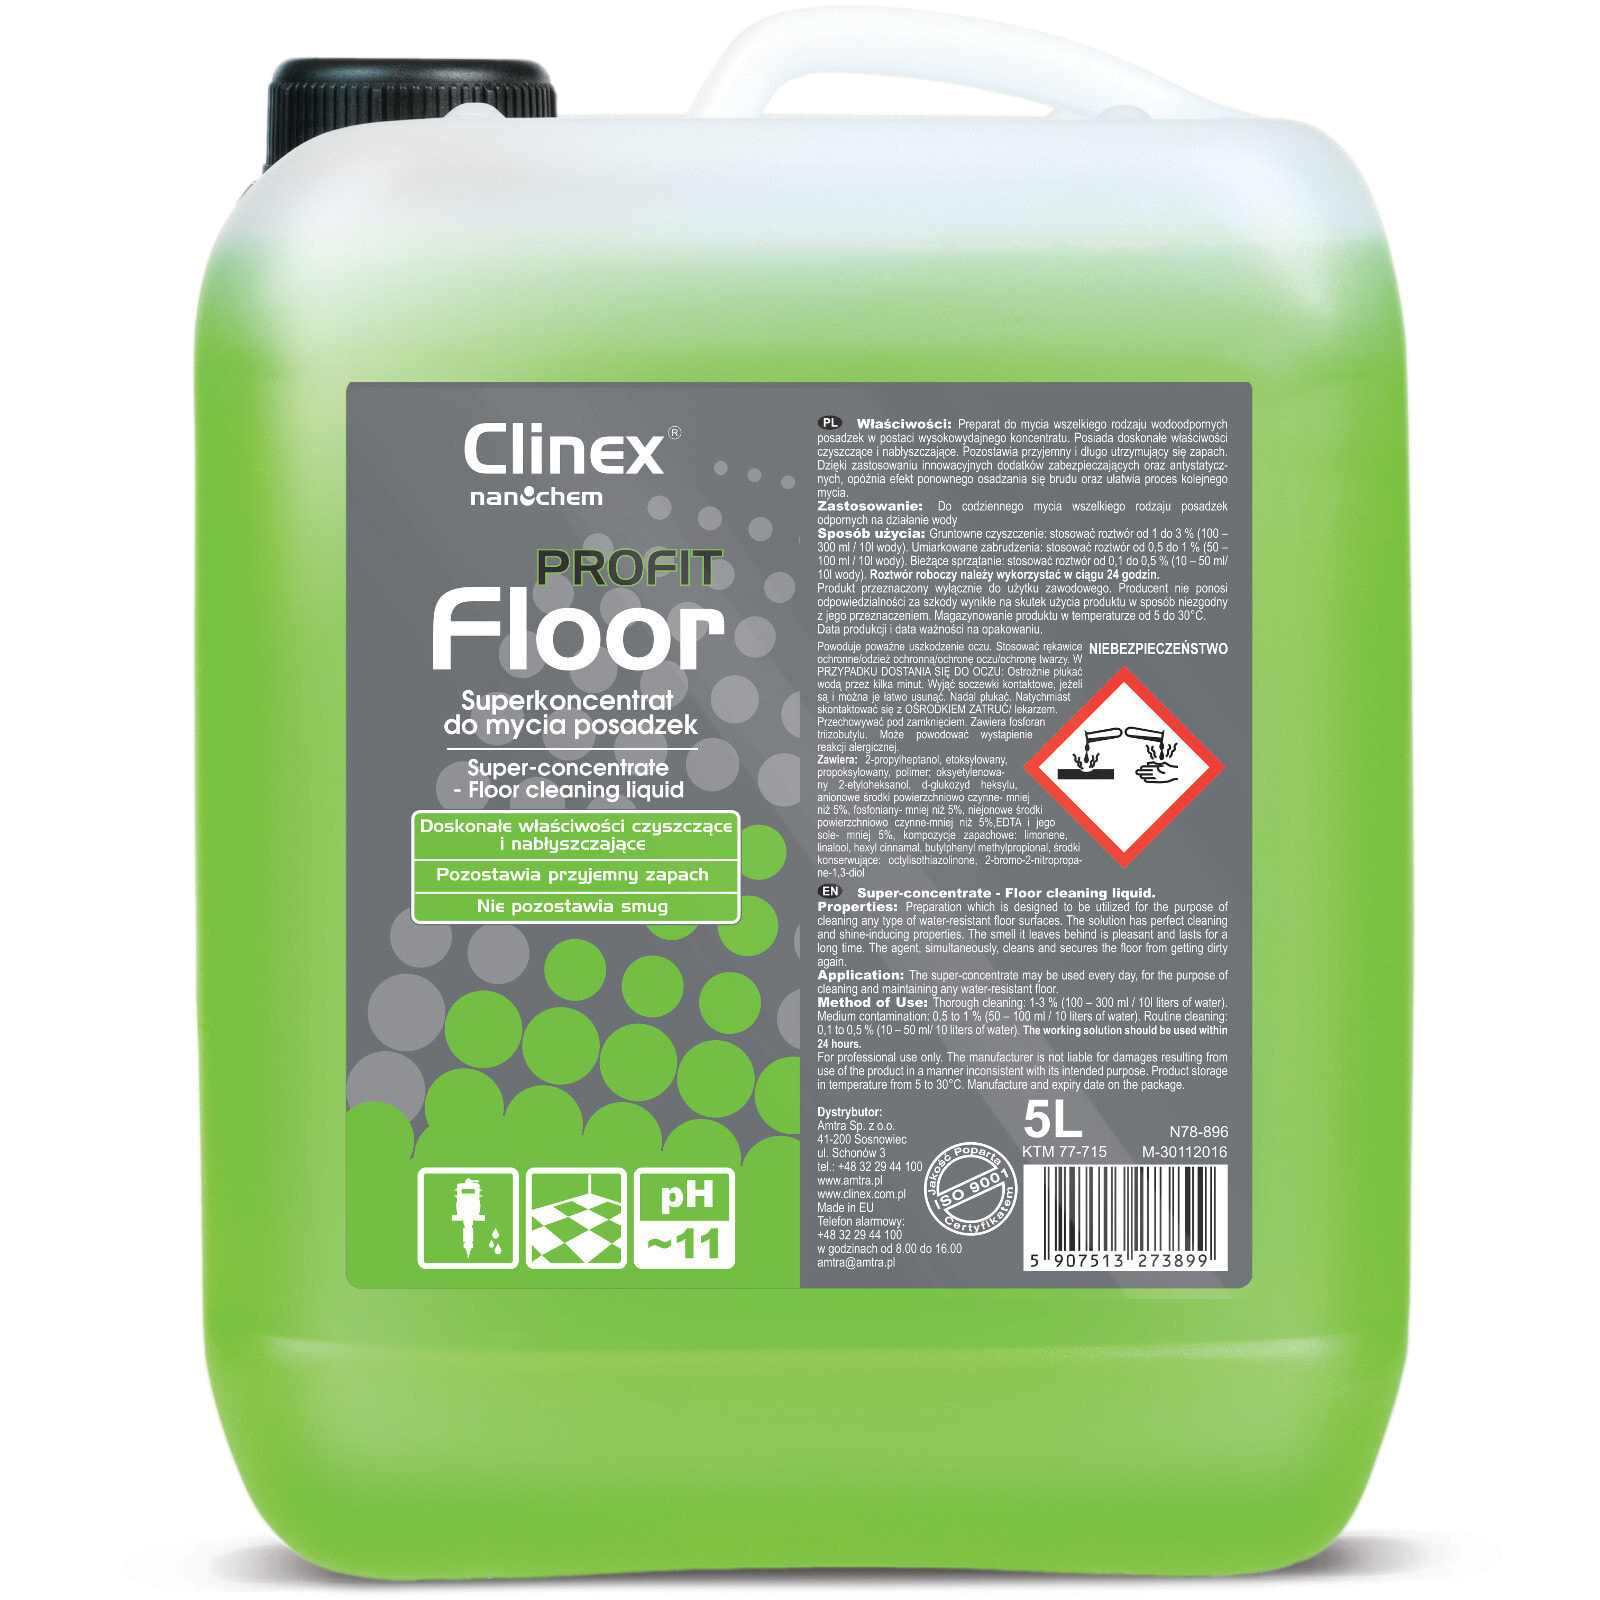 CLINEX PROFIT Floor 5L super concentrate for cleaning and polishing floors